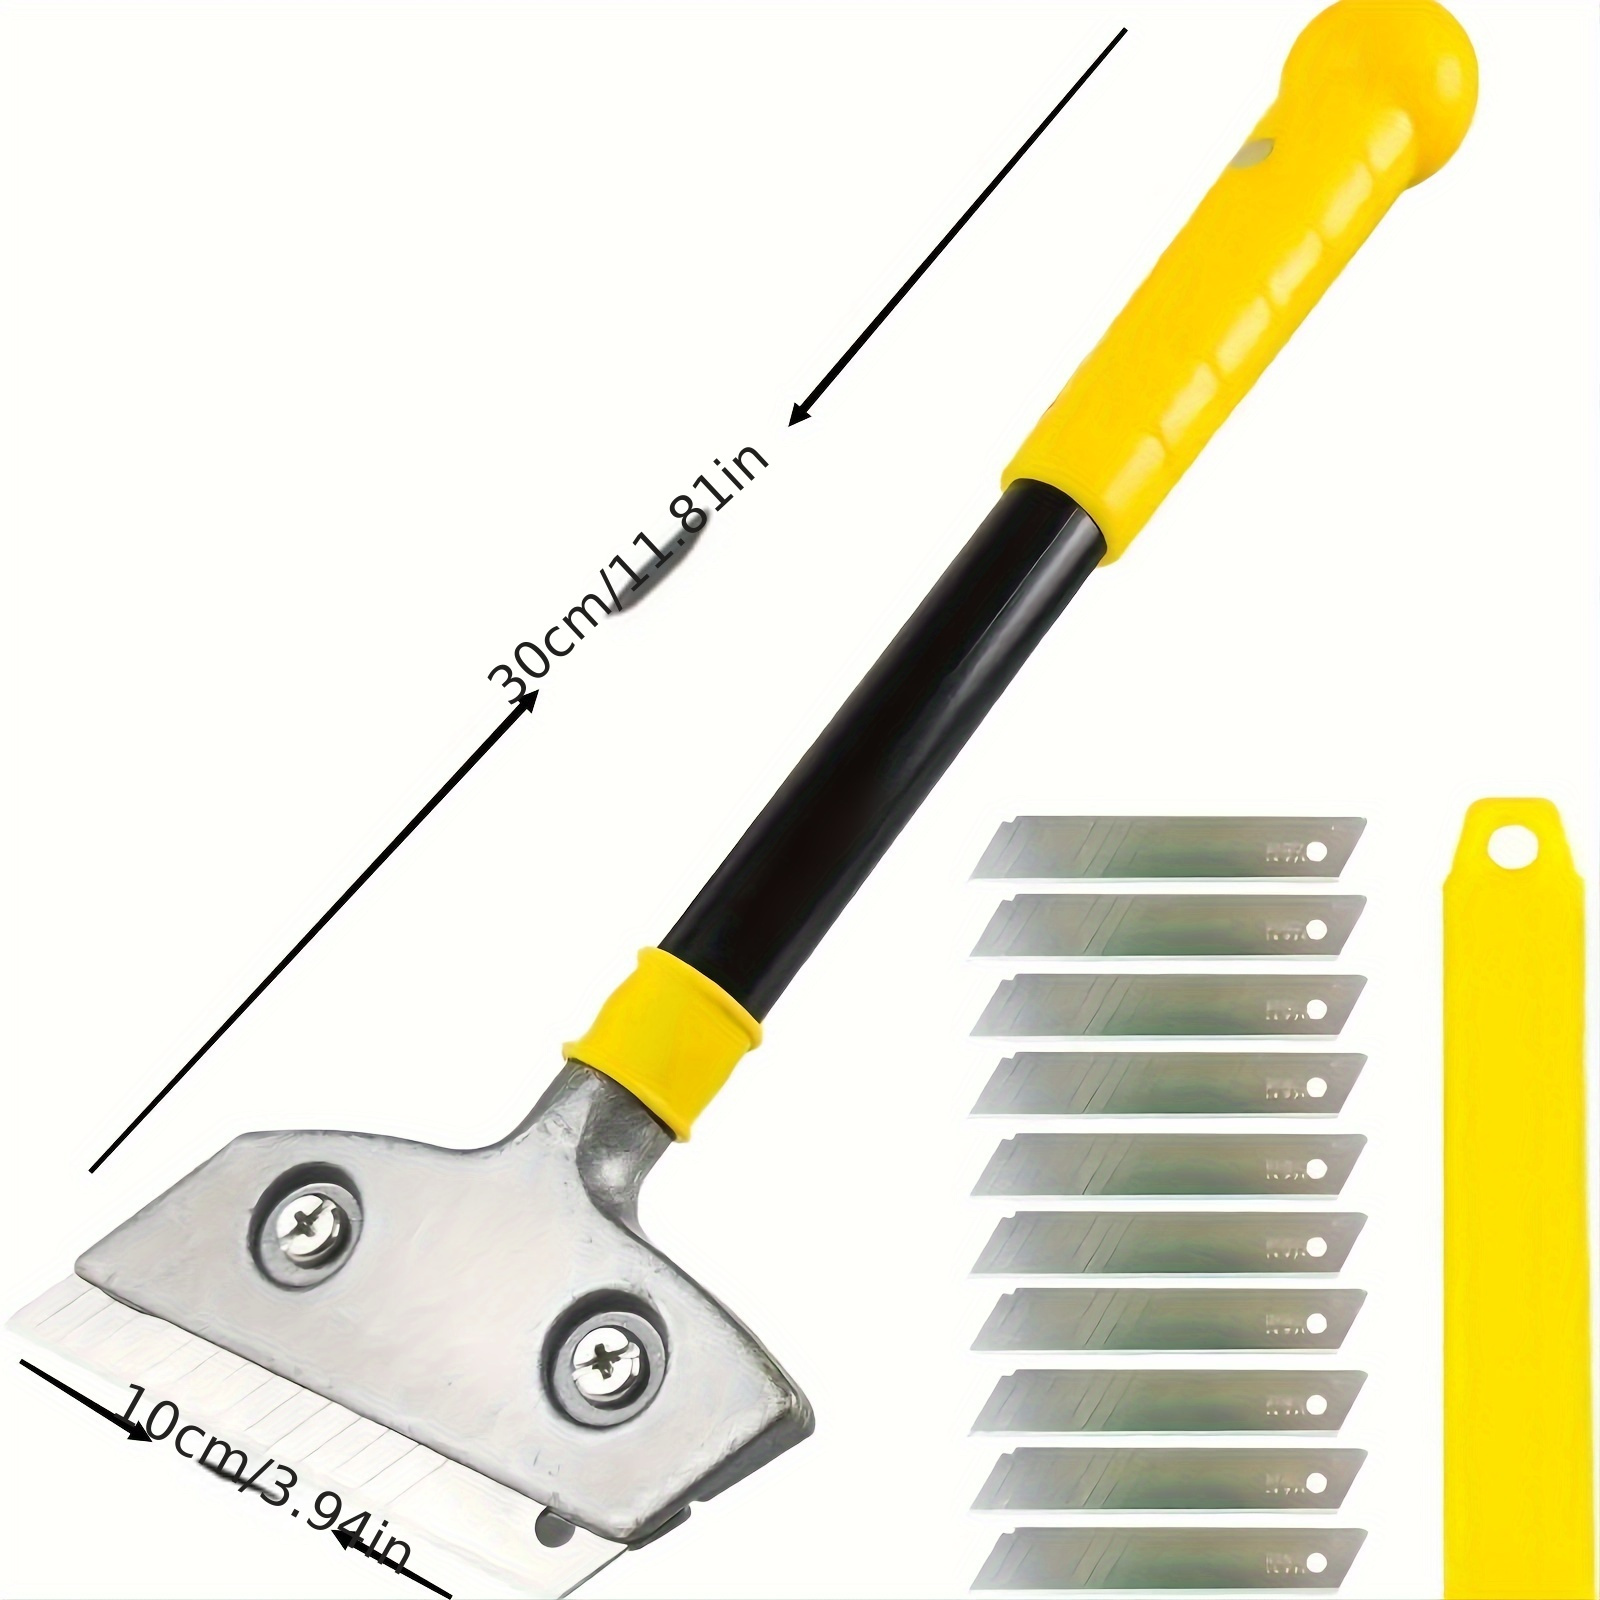 1 set blade putty scraper kit multi functional tool for removing wood windows glass wallpaper paint and tile adhesives details 1